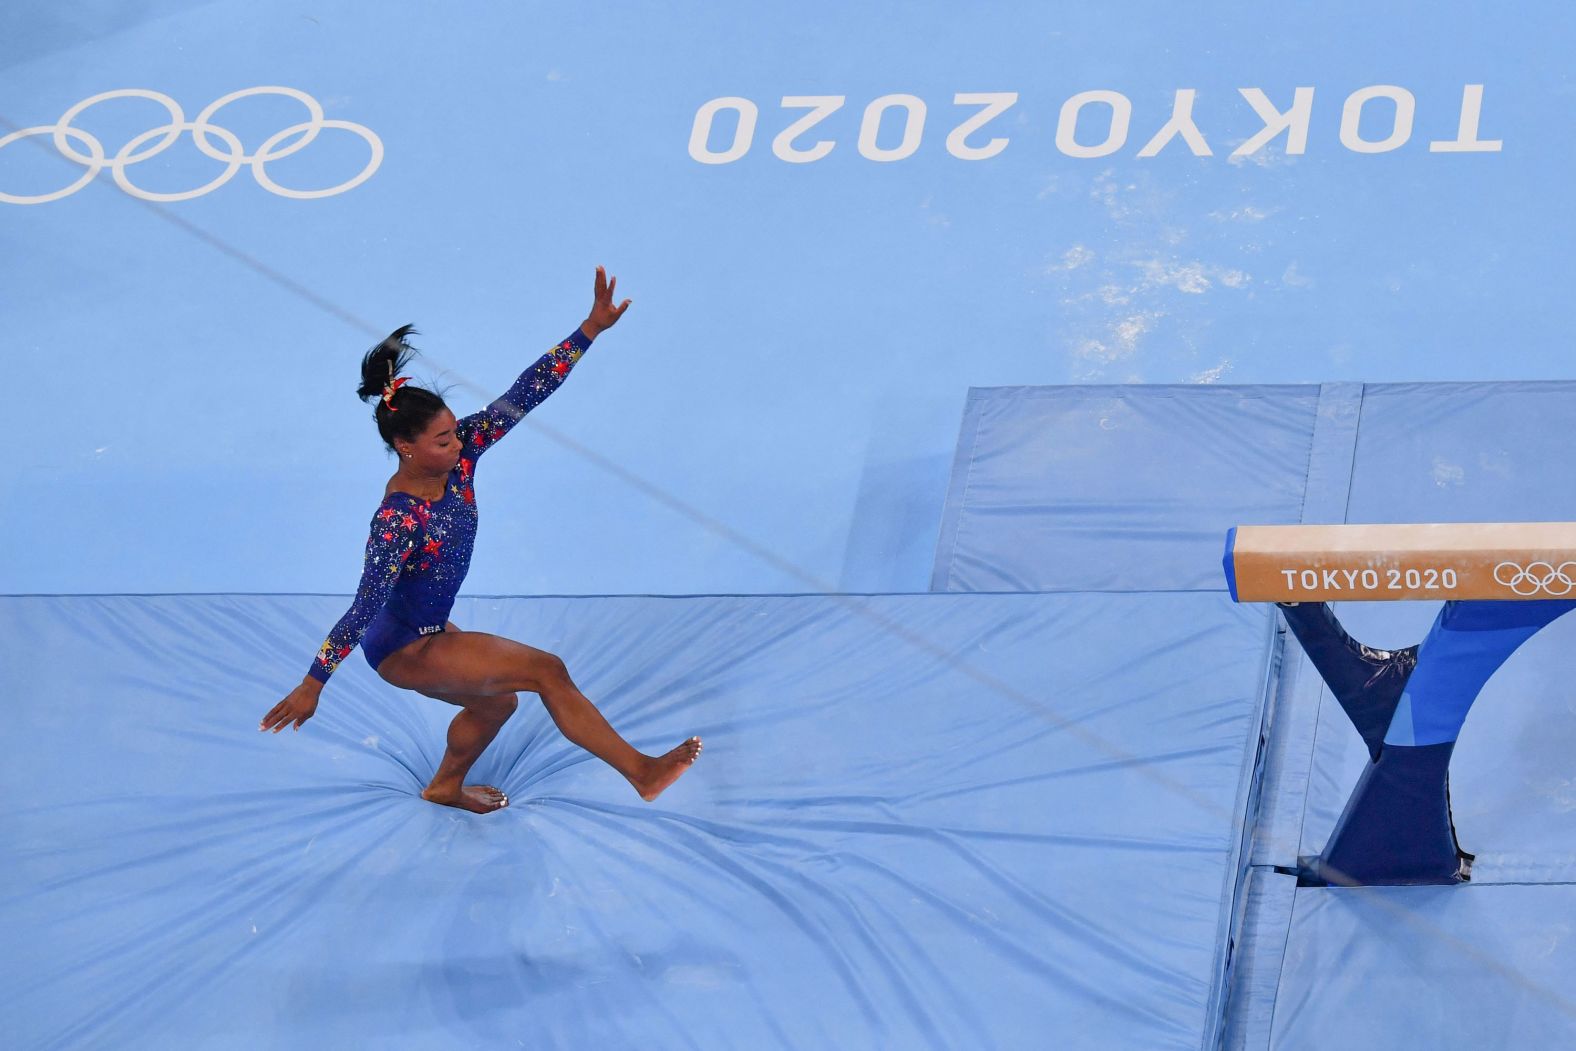 US gymnast Simone Biles stumbles on a balance beam dismount during the qualification event on July 25. She still qualified for the event finals, and the United States <a href="index.php?page=&url=https%3A%2F%2Fedition.cnn.com%2Fworld%2Flive-news%2Ftokyo-2020-olympics-07-25-21-spt%2Fh_fa065b586bab1321ad9e8ea5da343c94" target="_blank">finished second in qualification for the all-around.</a> "Obviously, there are little things we need to work on, so we'll go back and practice and work on that just so we can do our best performance at team finals (on Tuesday), because that's what matters," Biles said.